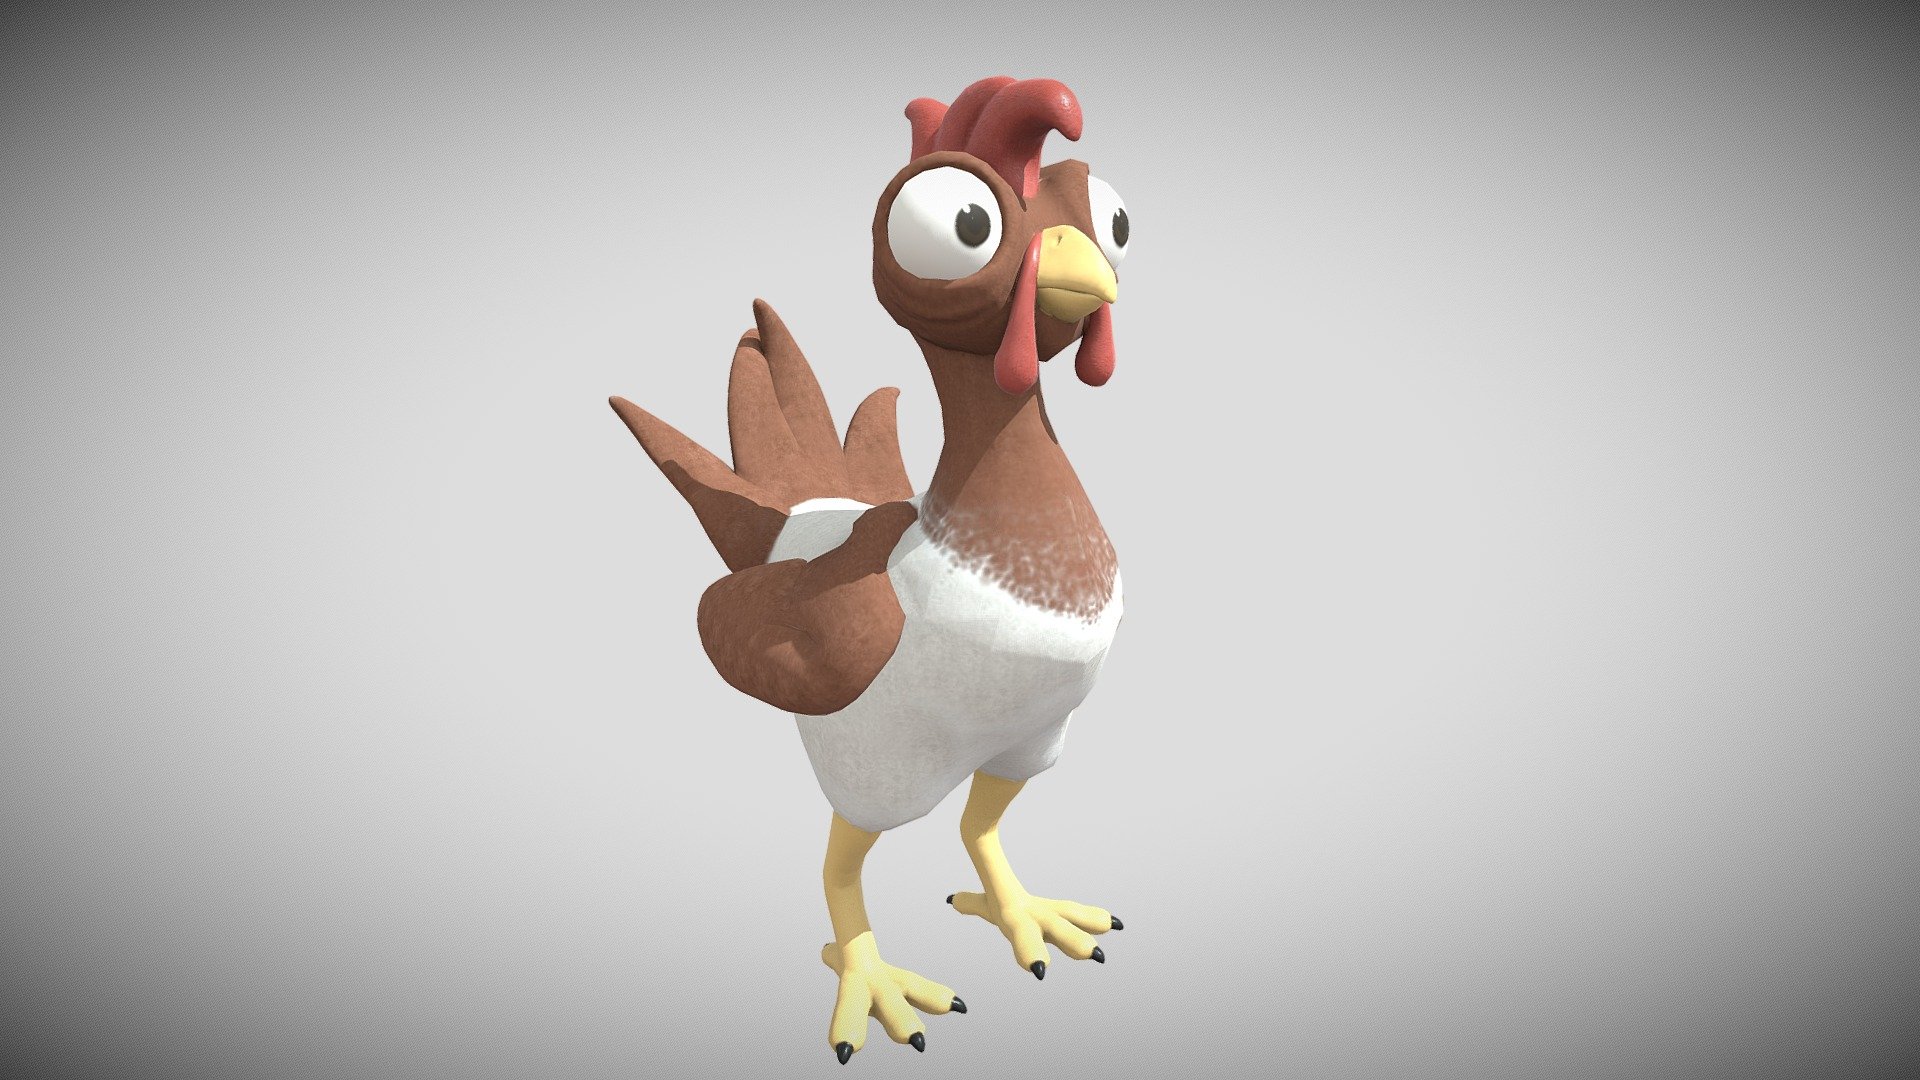 This is the main player character I made for the game Chicken Coup!
https://comx.uogs.co.uk/23/teams/6-headed-moose/
This model was made in ZBrush and retopologised in 3DS max. textures done in Substance Painter 3d model